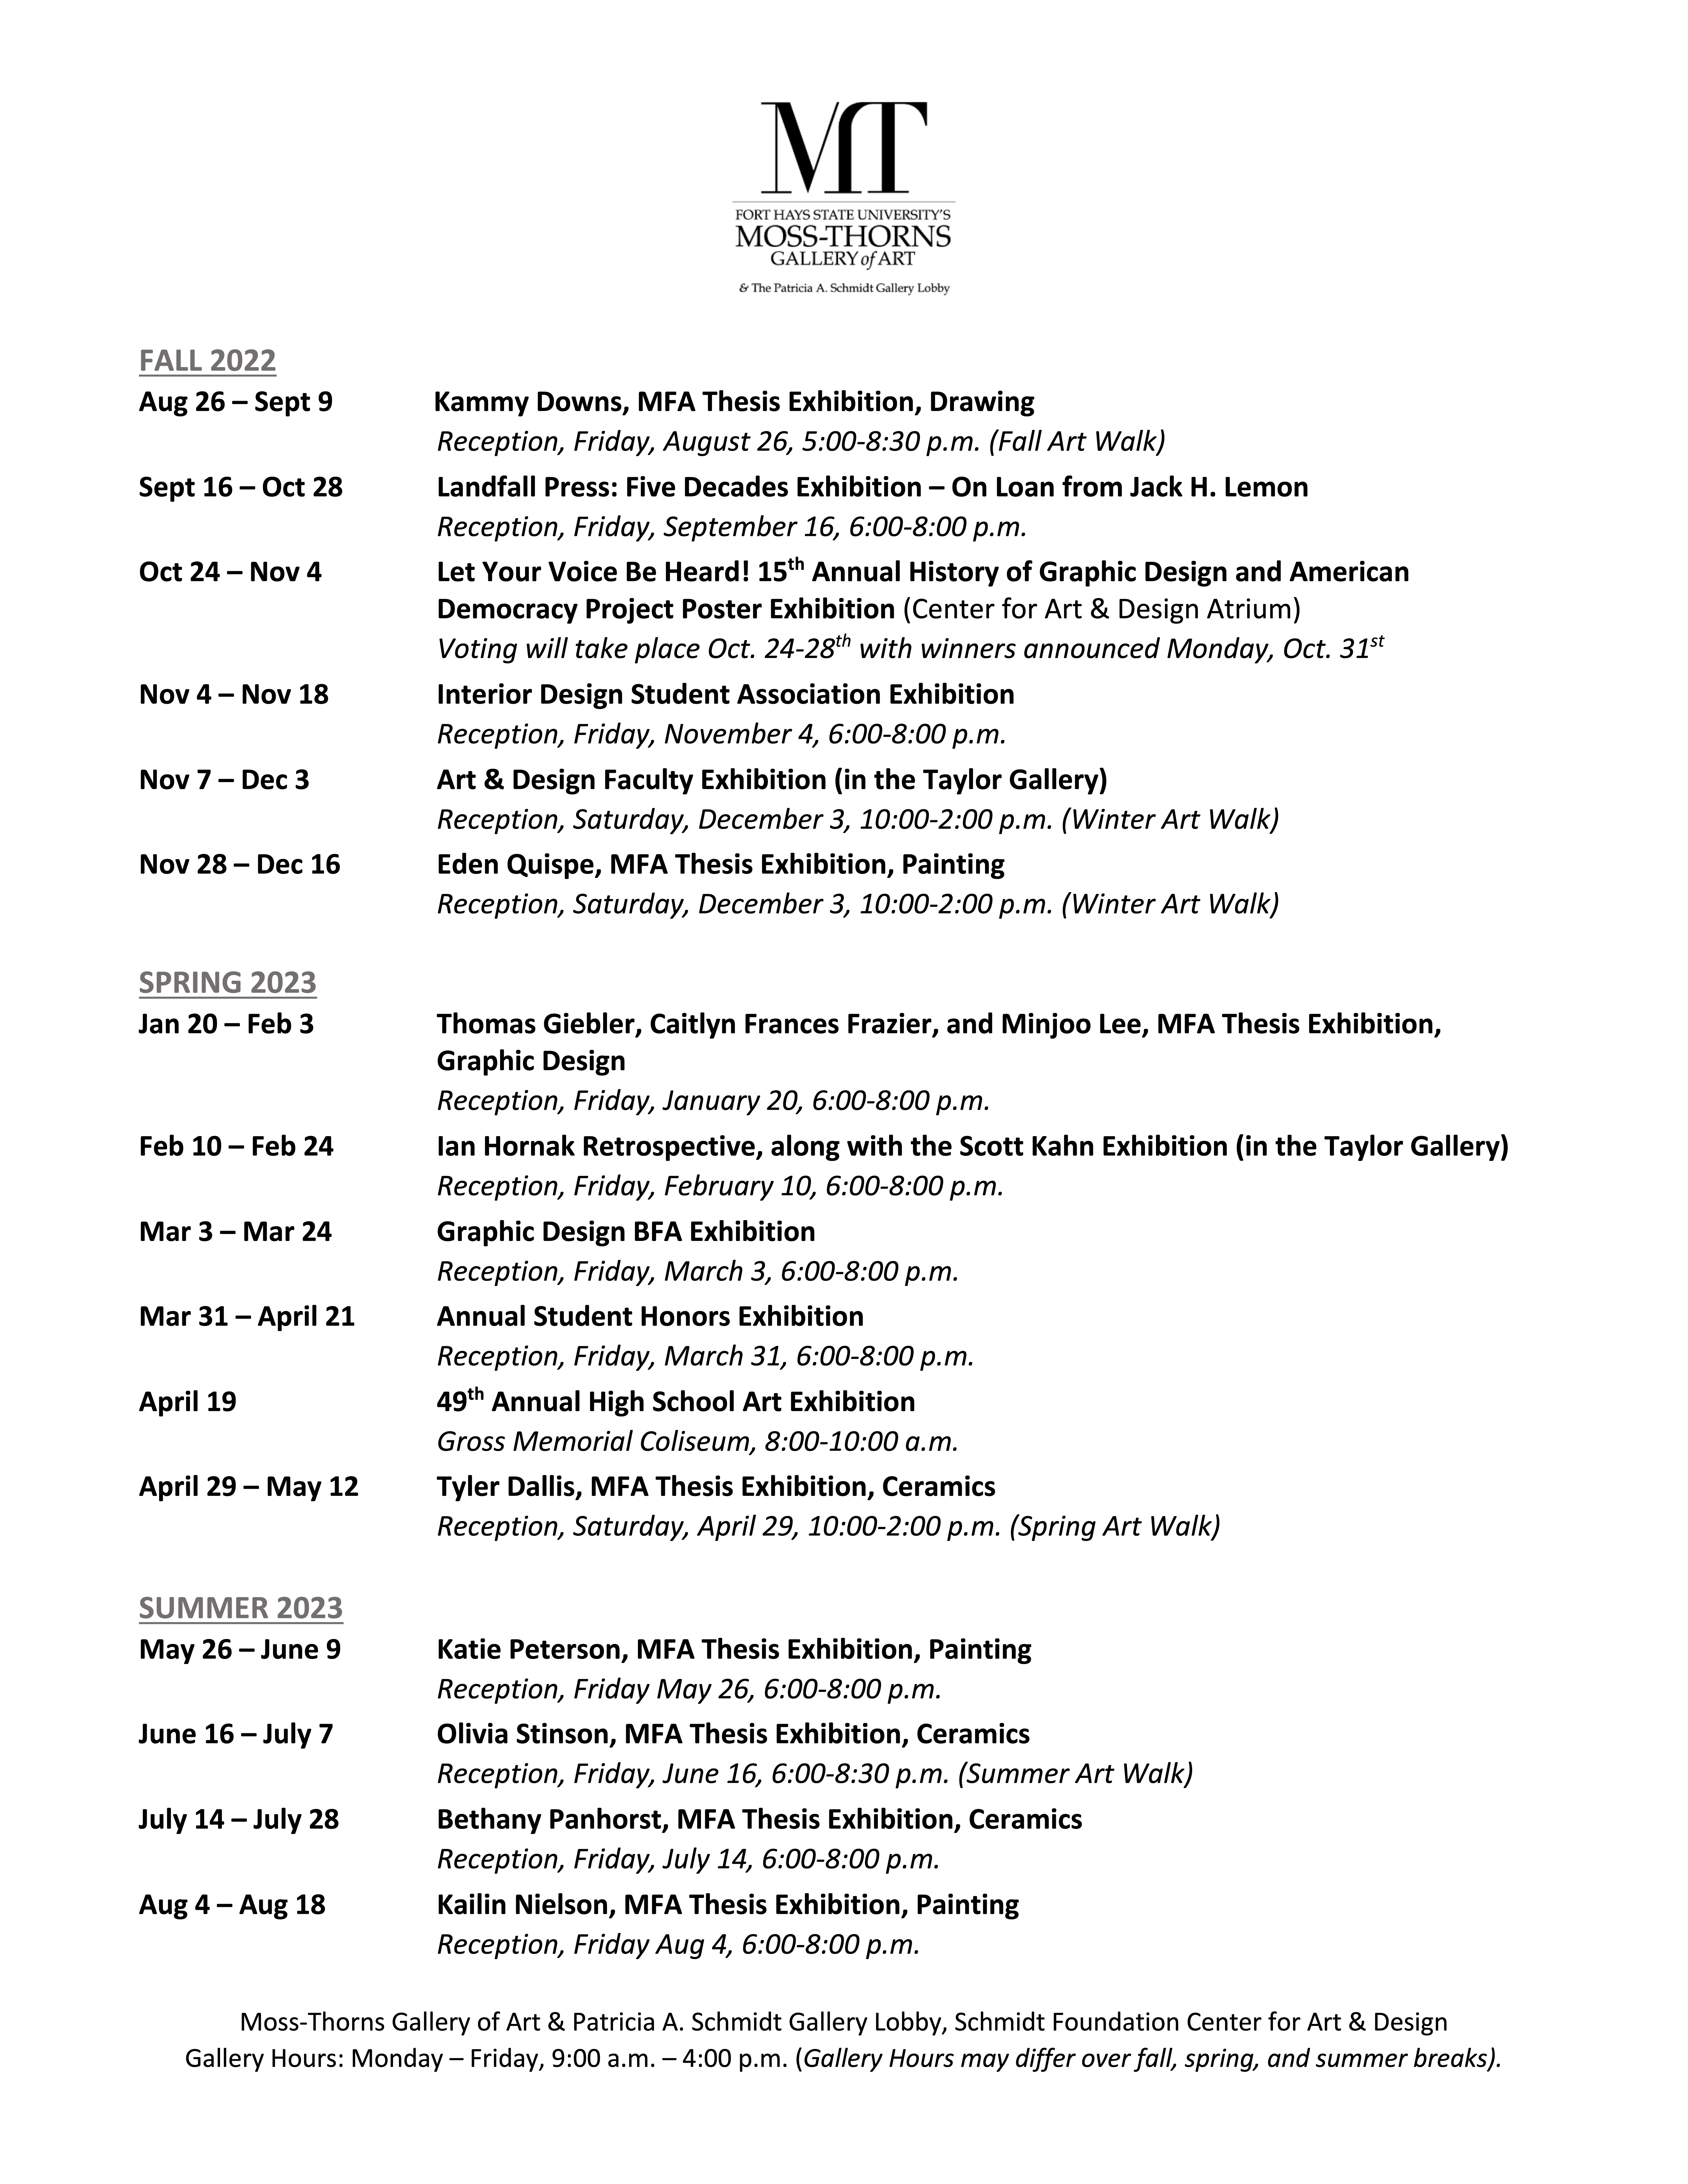 gallery-schedule-dates-2022-23.png